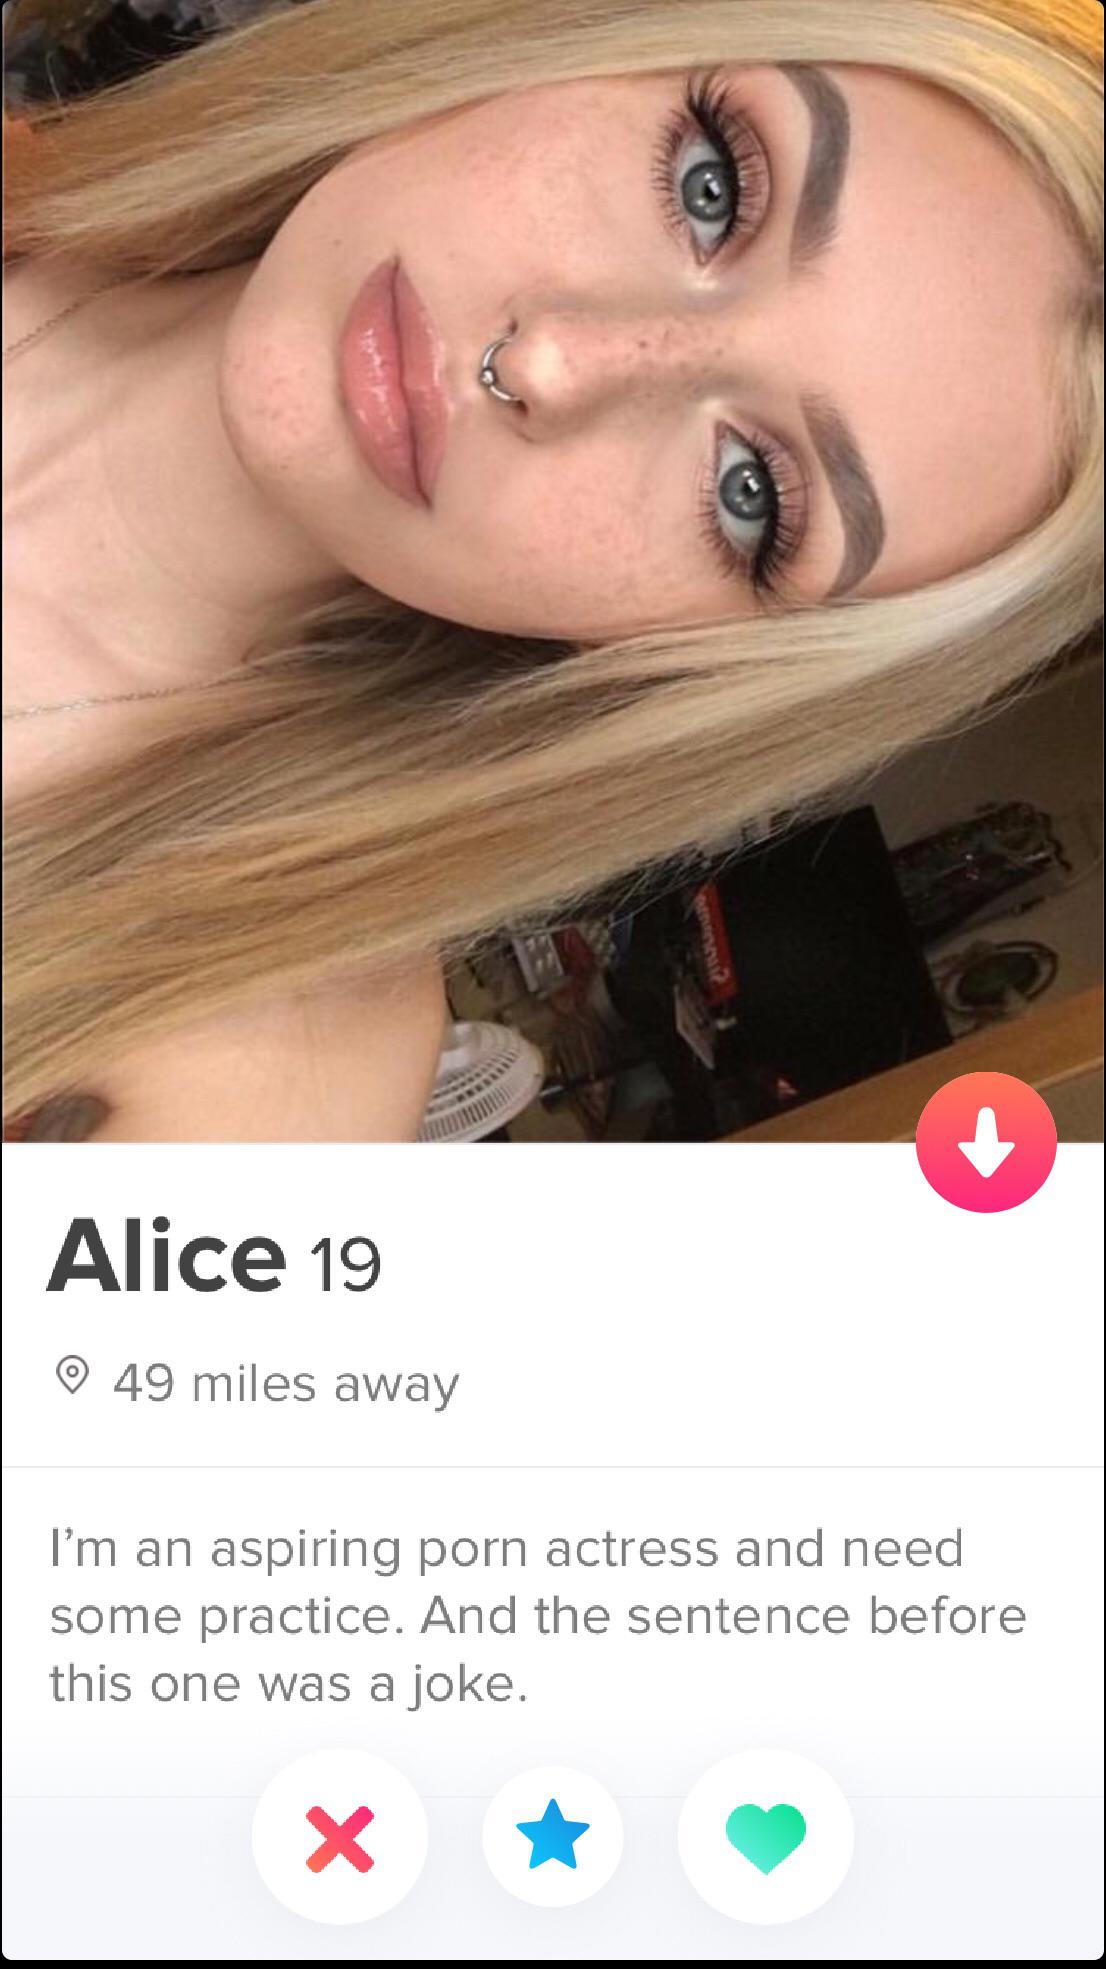 shameless tinder - Alice 19  I'm an aspiring porn actress and need some practice. And the sentence before this one was a joke.